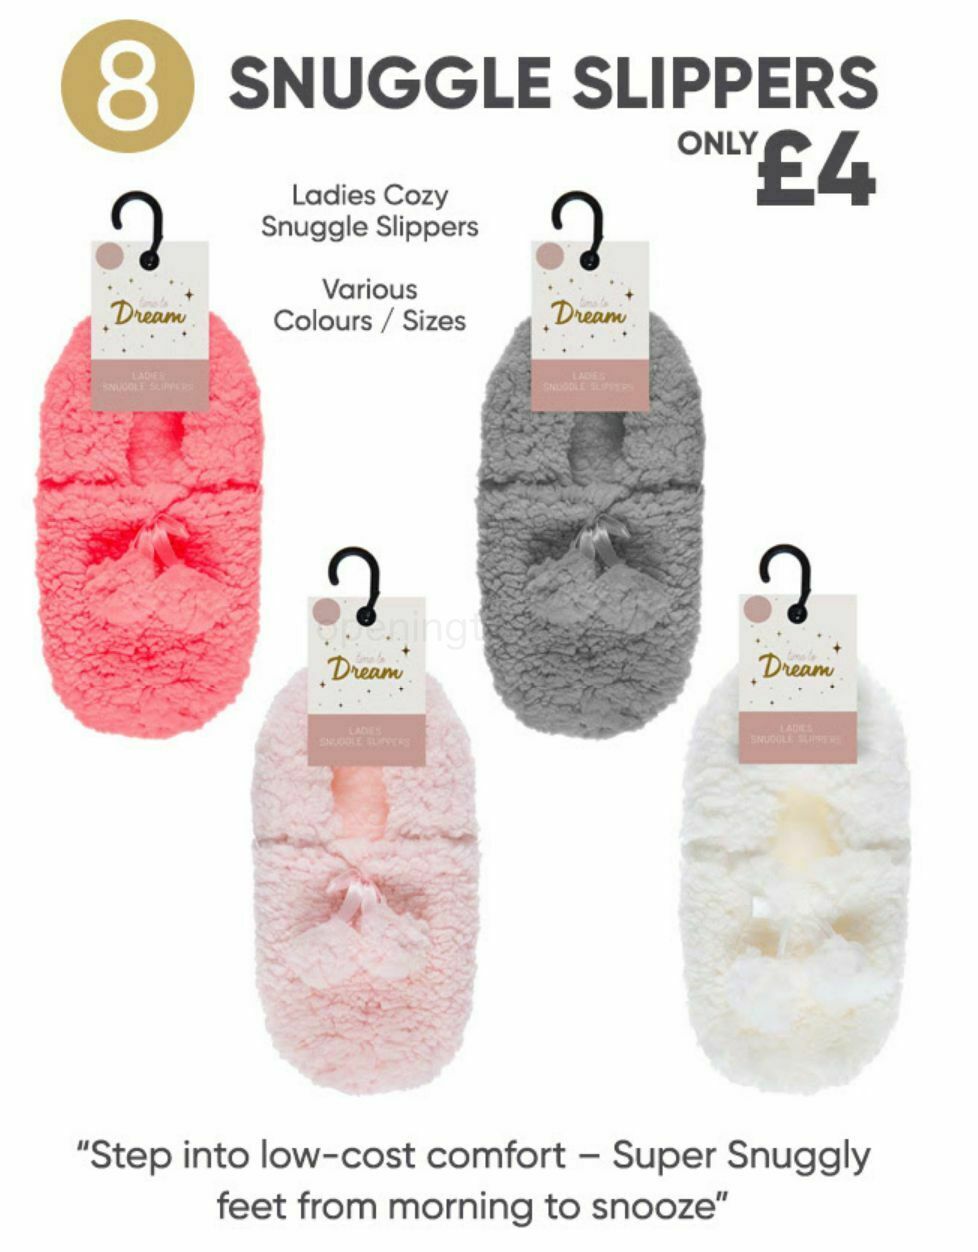 B&M Winter Cosy Offers from 20 December